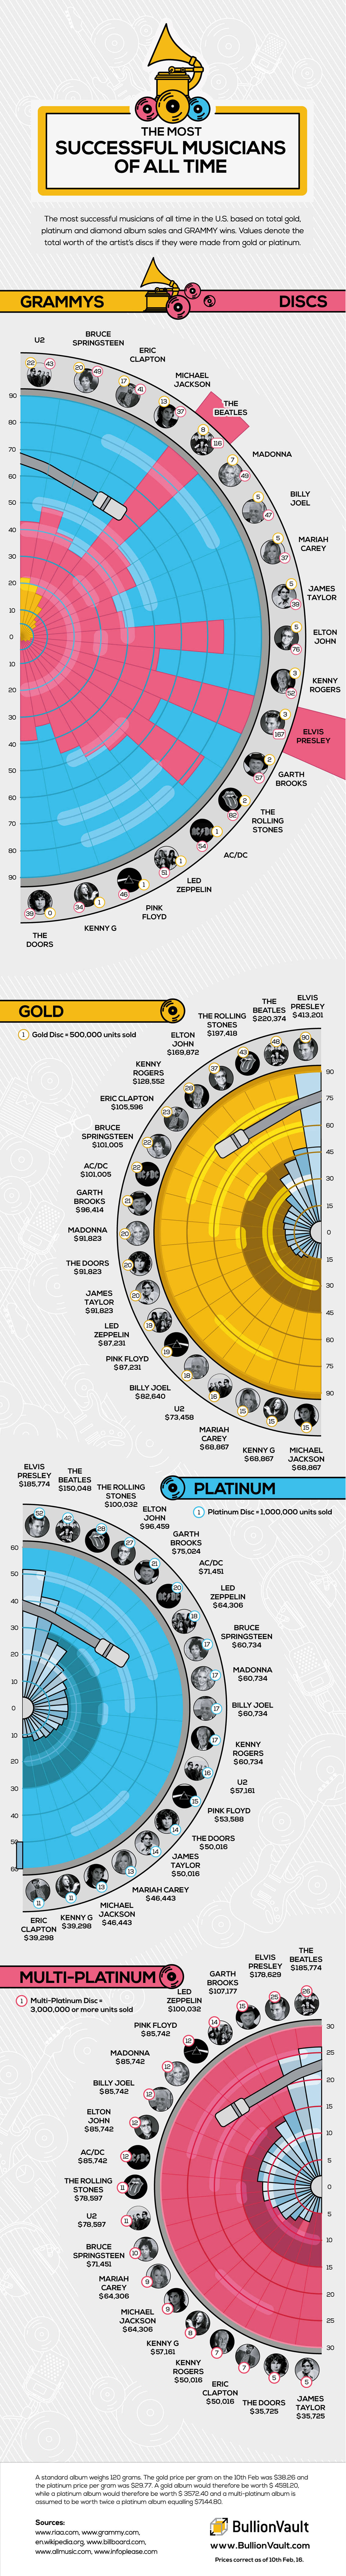 Most Successful Musicians of All Time - Music Infographic